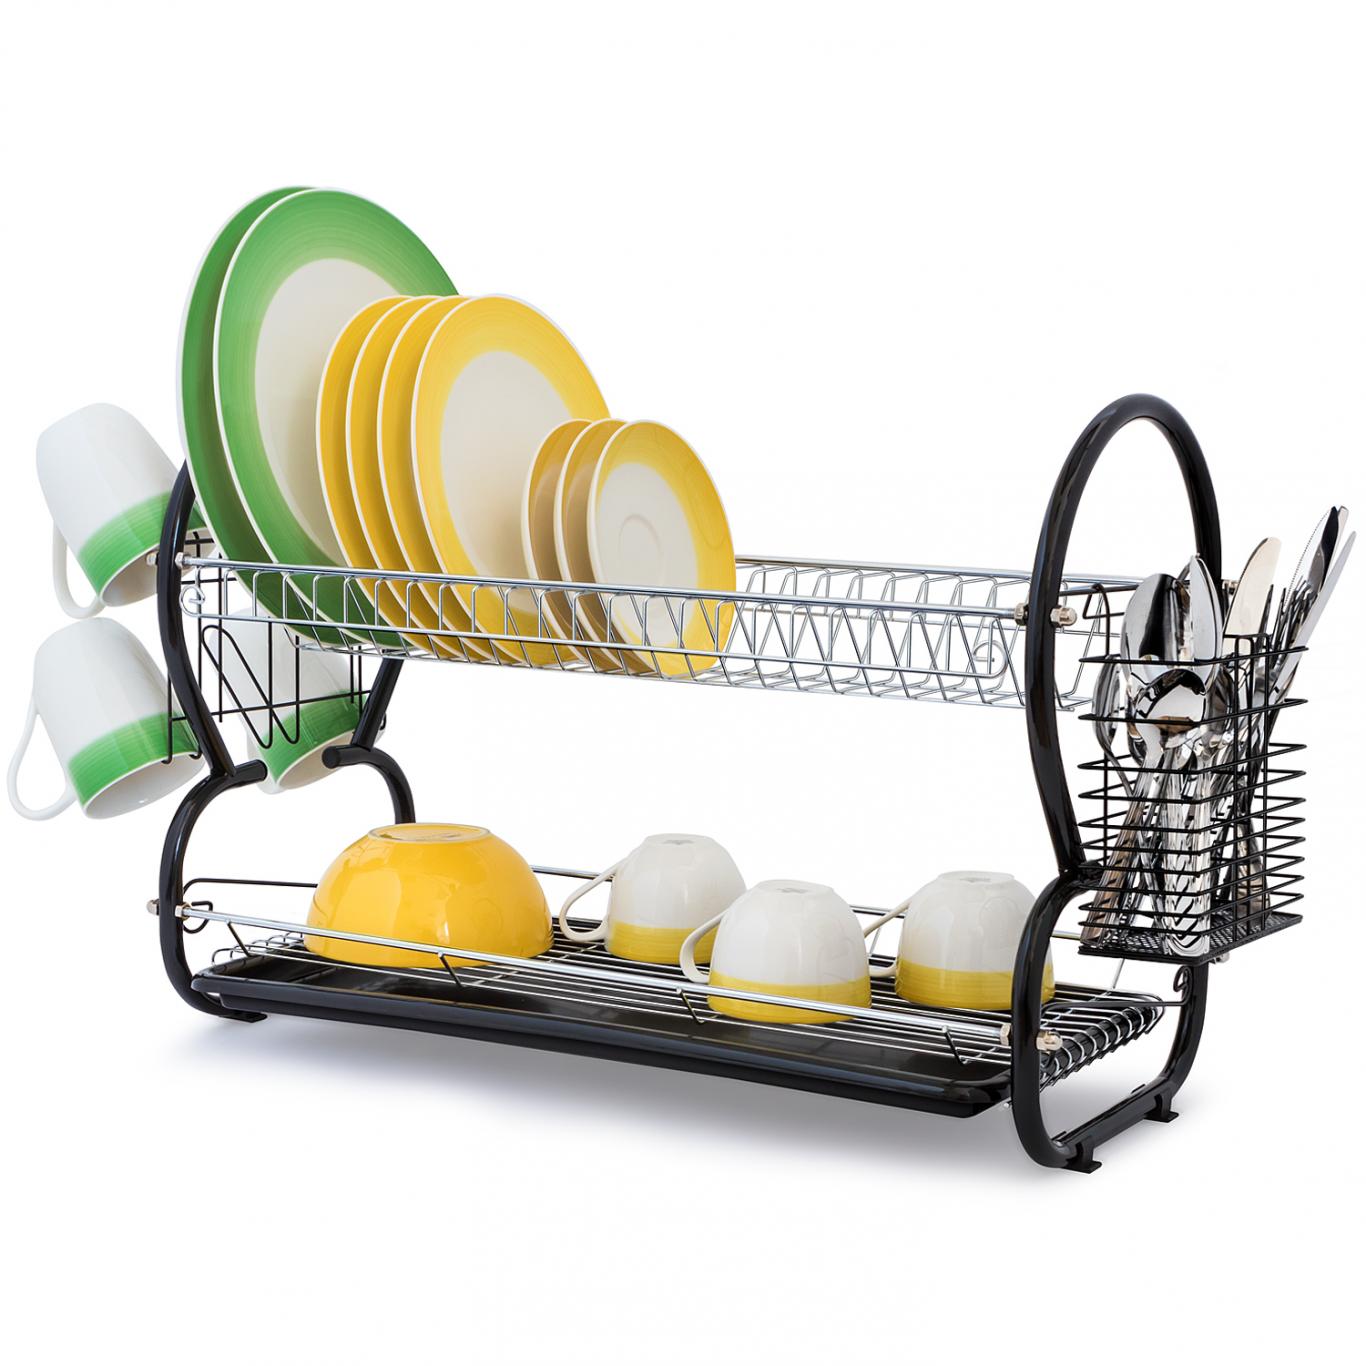 The choice of a best dish drainer depends on several requirements, and the size of your kitchen is one of them. There are many various options for both spacious